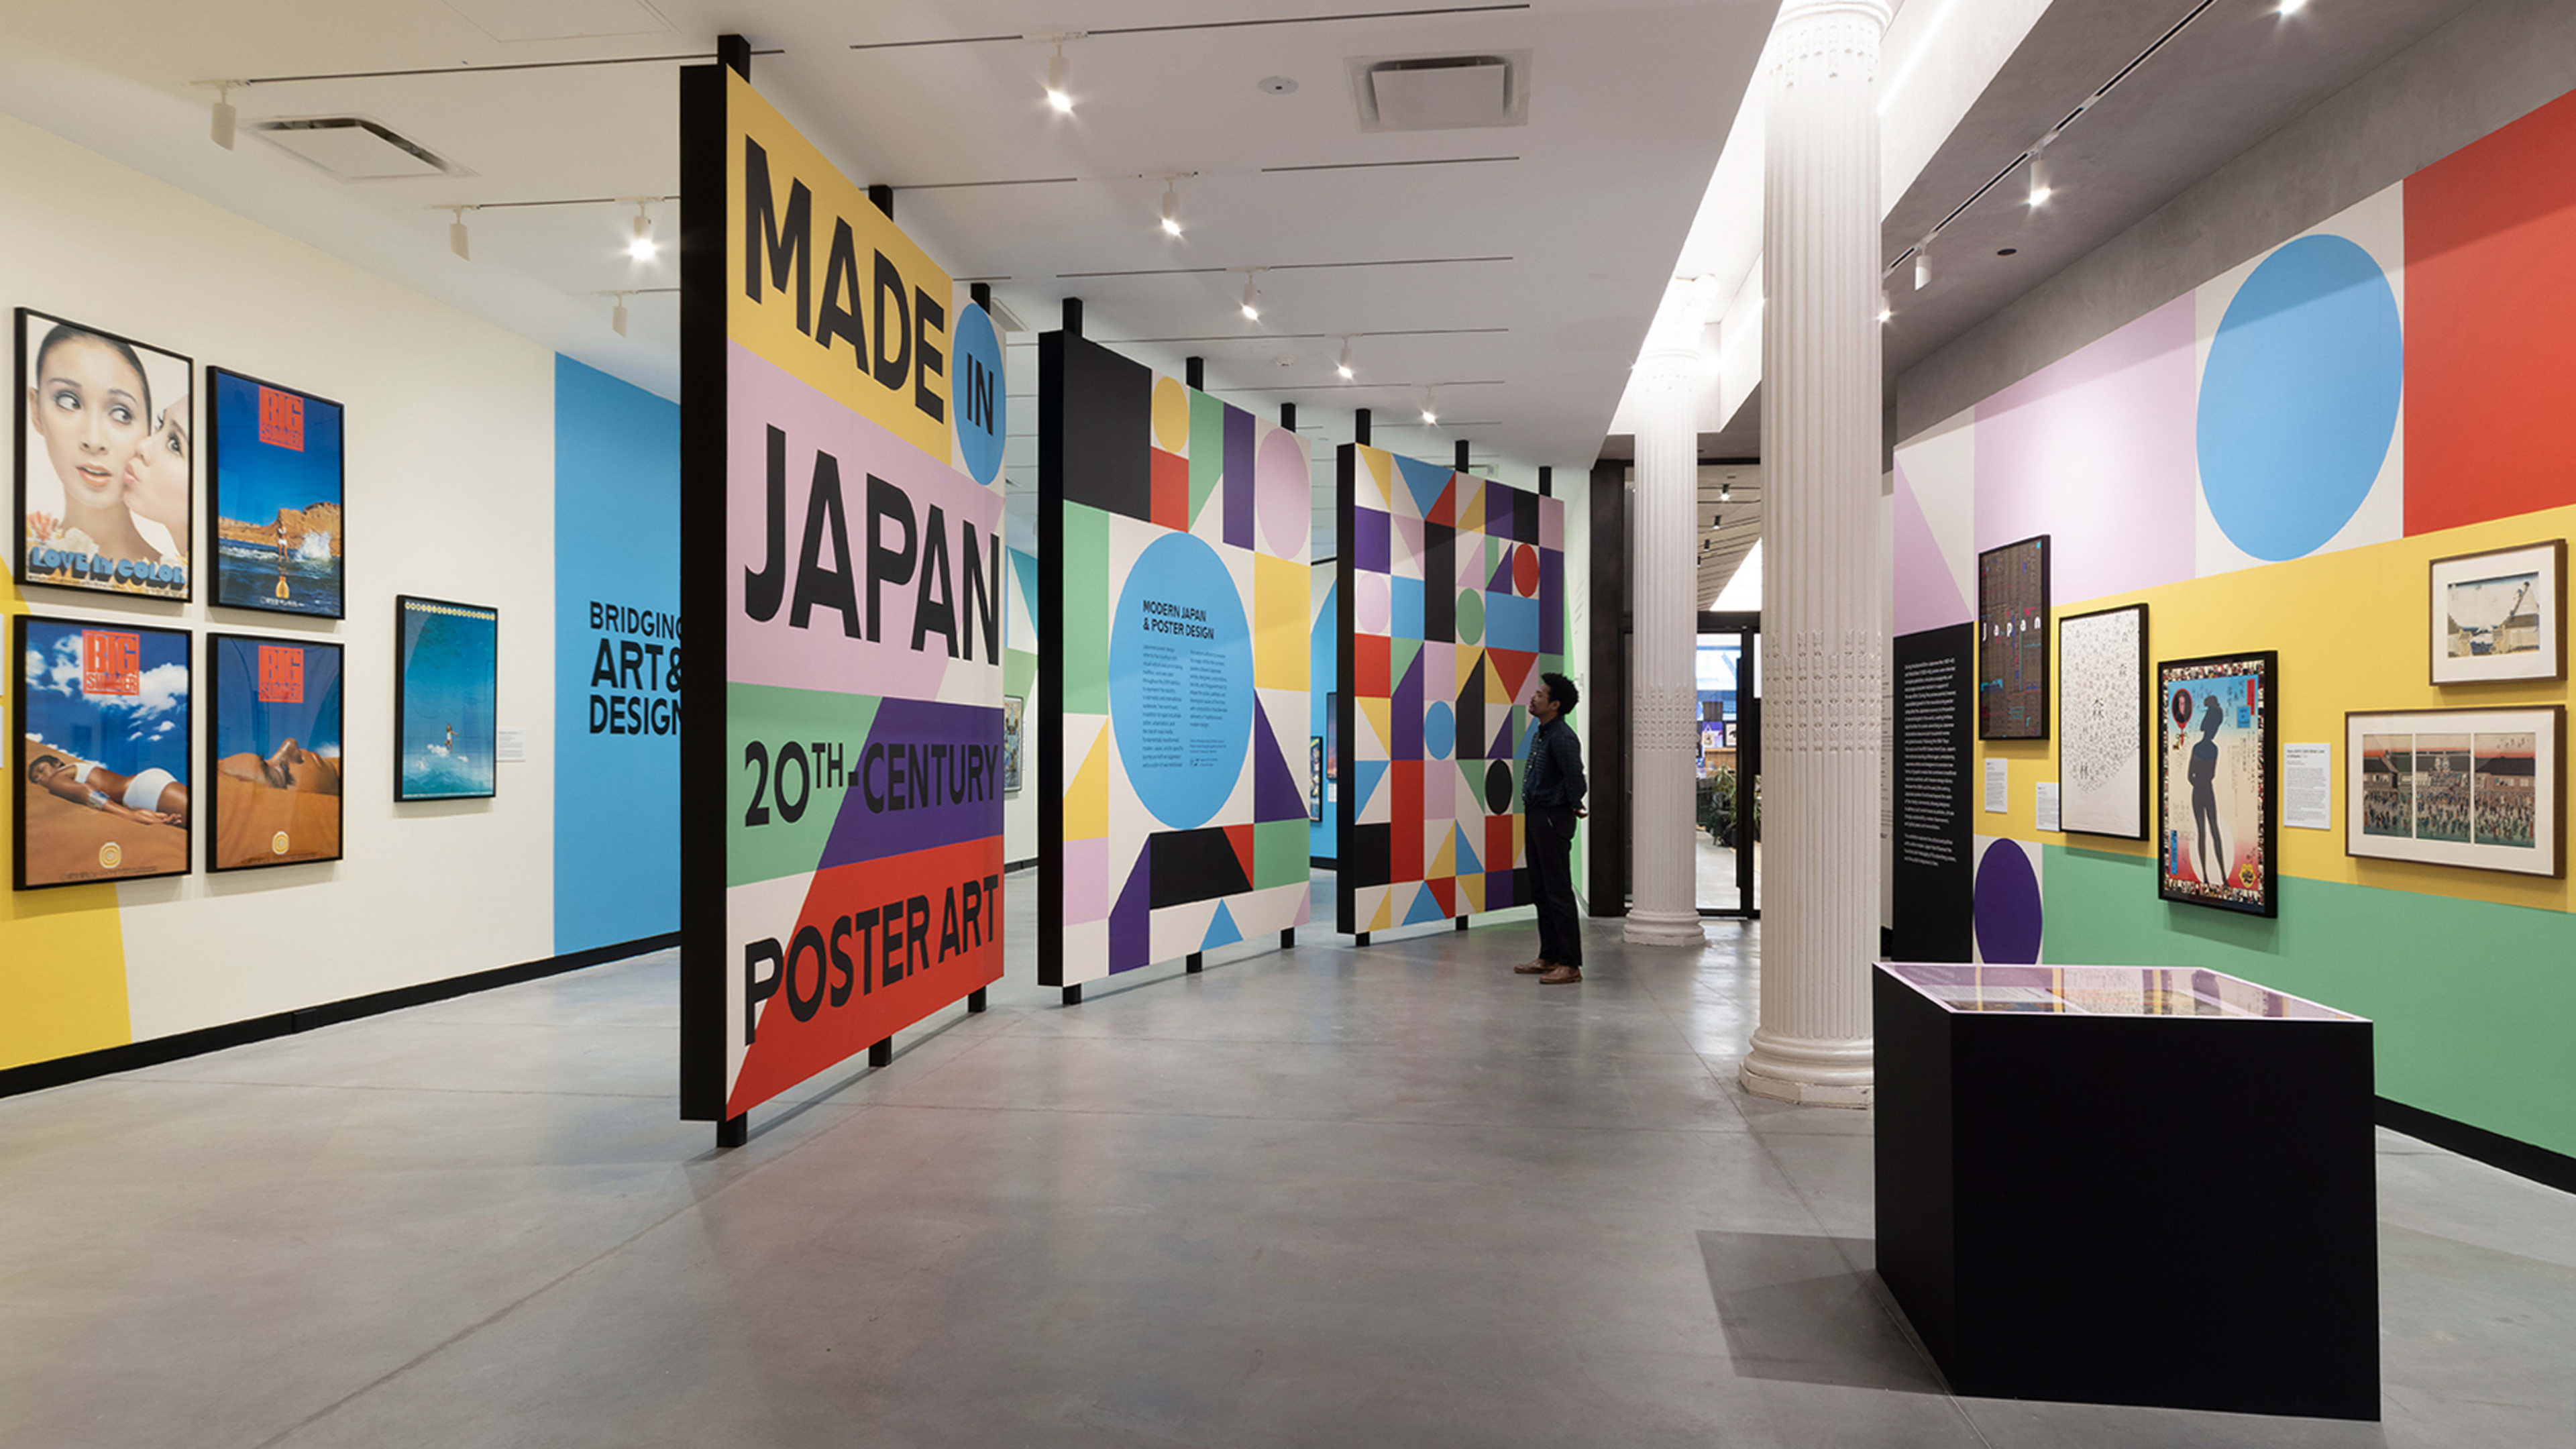 How Japan used poster design to reshape its culture